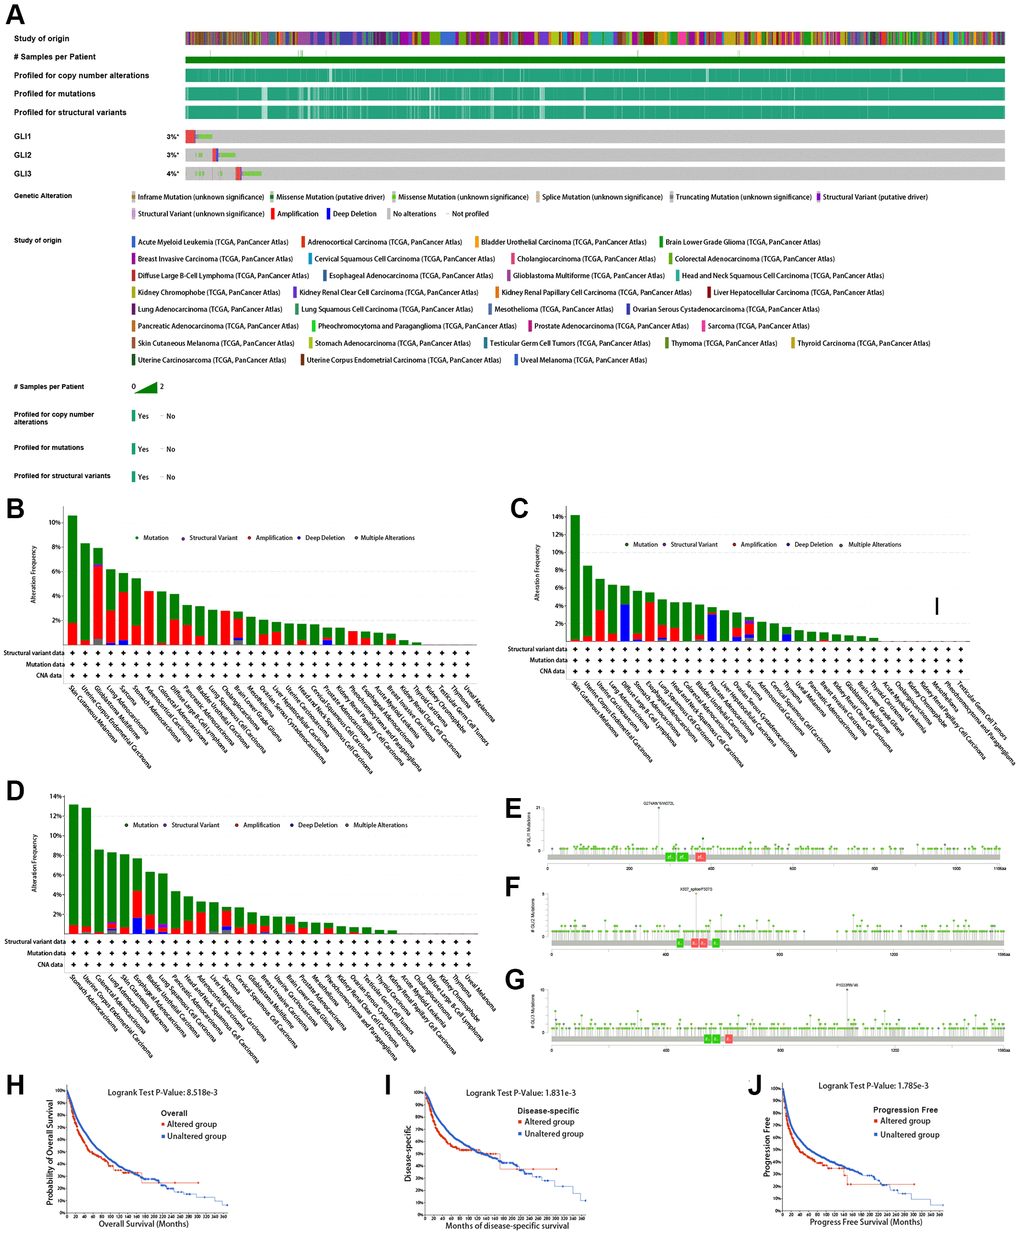 Mutation signature mapping of GLI1, GLI2, and GLI3 genes in the cBioPortal database. (A) An overview of the genomic alternations of GLI1, GLI2, and GLI3 occurred in pan-cancer. The mutation frequency and corresponding mutation types of GLI1 (B), GLI2 (C), and GLI3 (D) in different cancers. Mutation sites of GLI1 (E), GLI2 (F), and GLI3 (G). Kaplan-Meier plot showing the comparison of OS (H), DSS (I), and PFS (J) in cases with/without GLI1 gene alterations in the tumor.